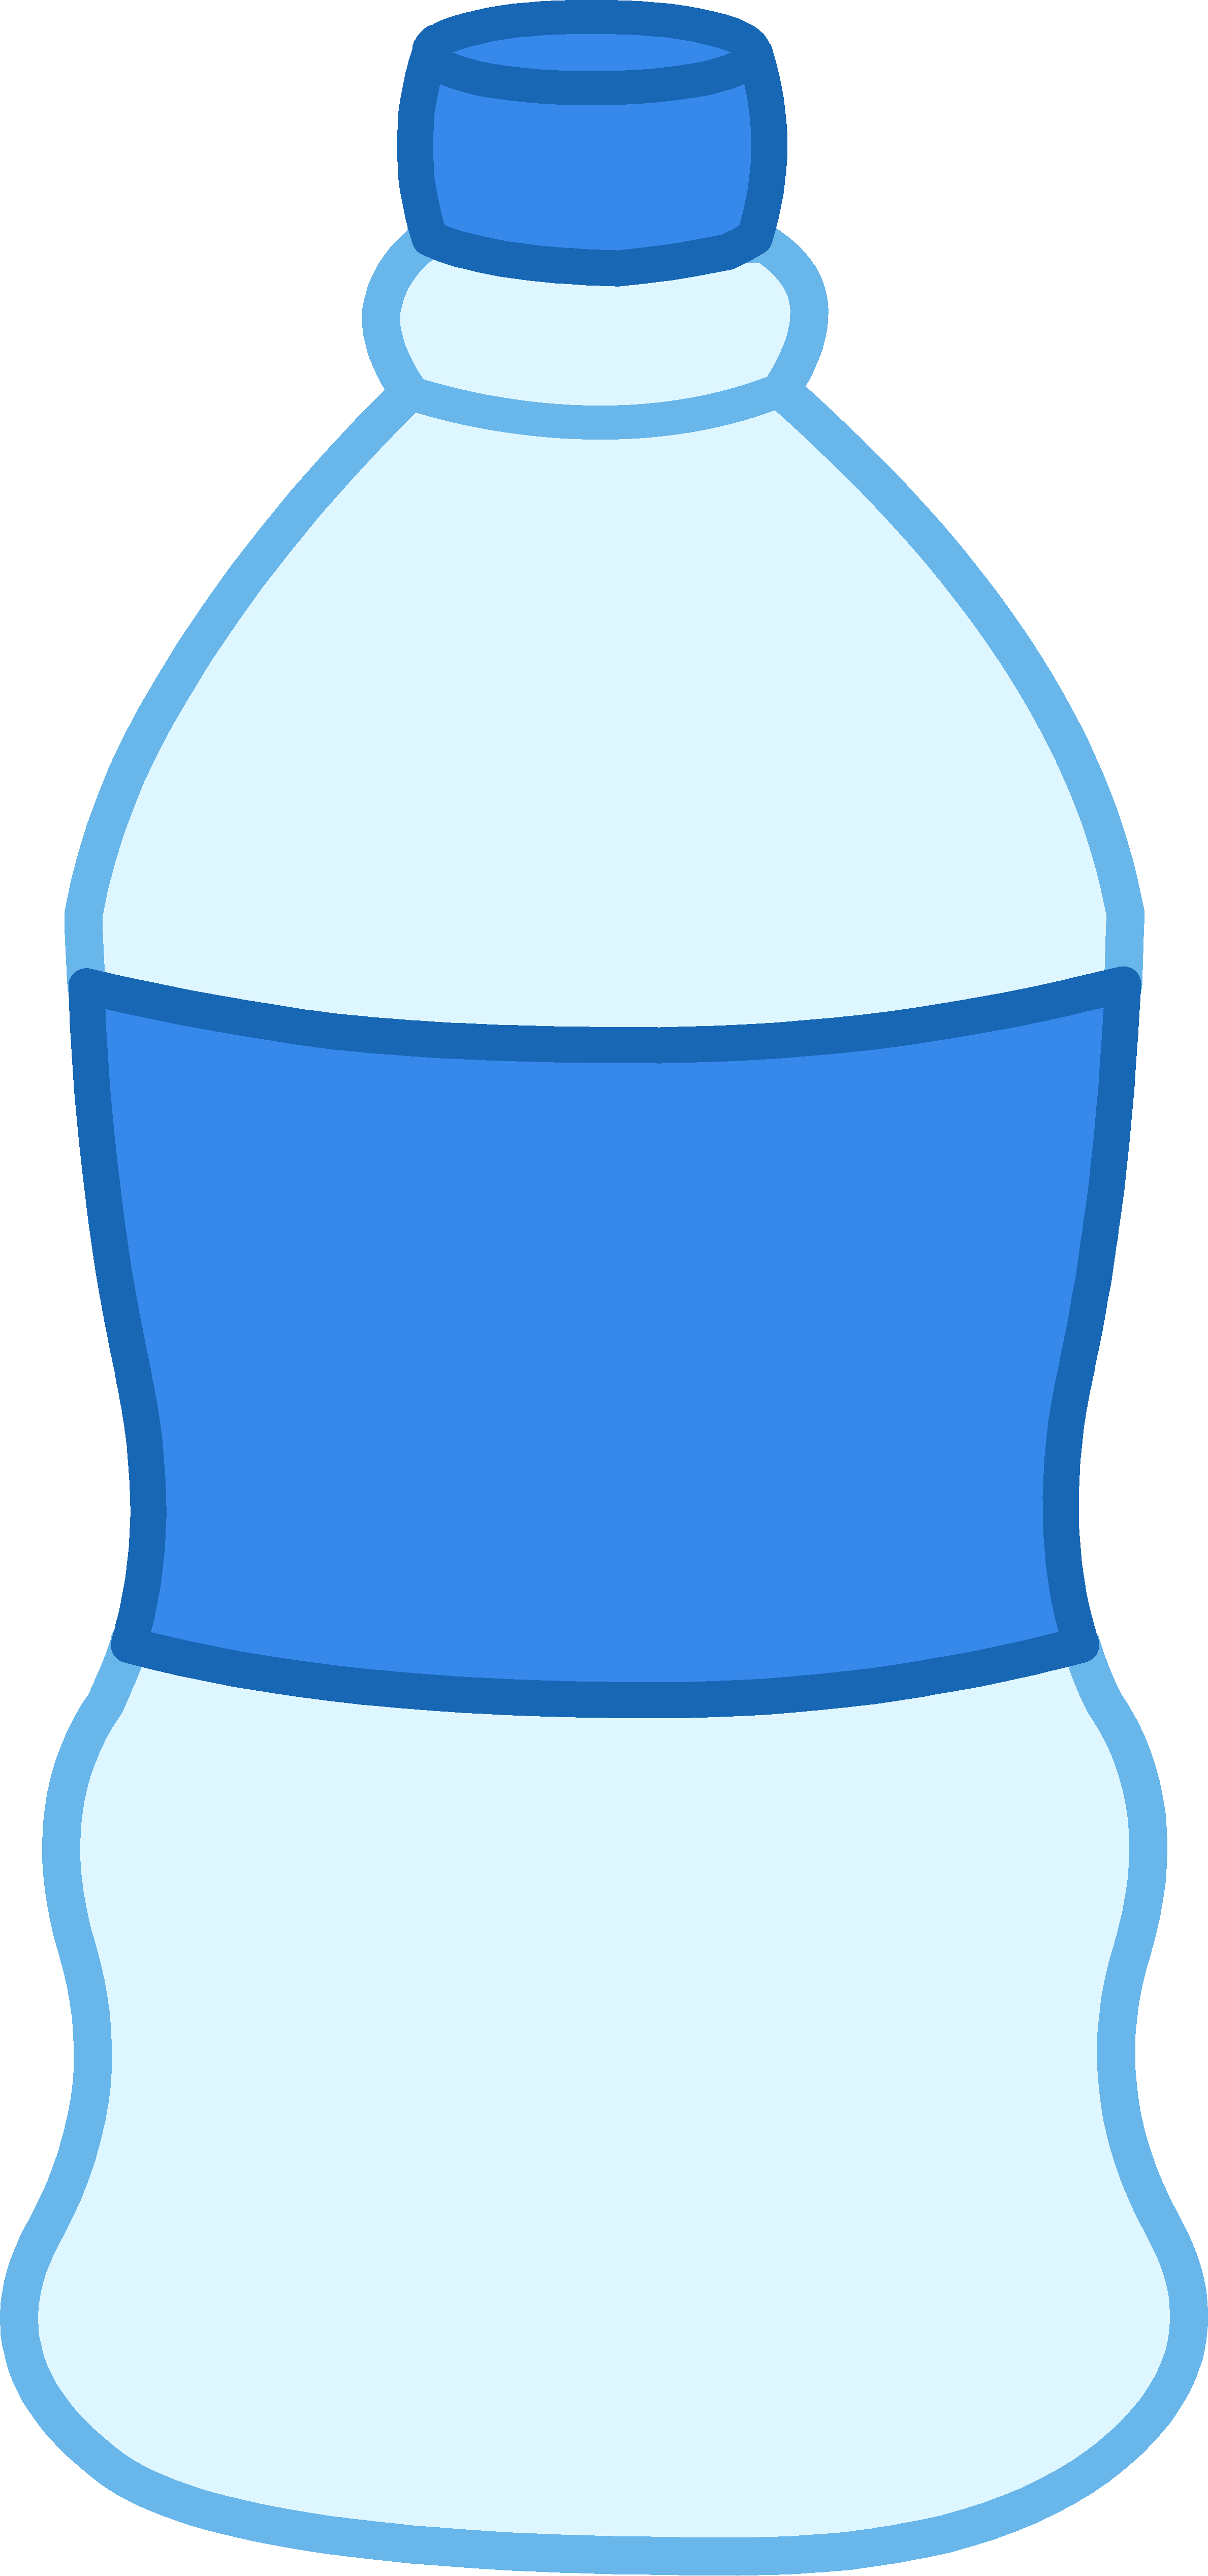 drinking bottled water clipart